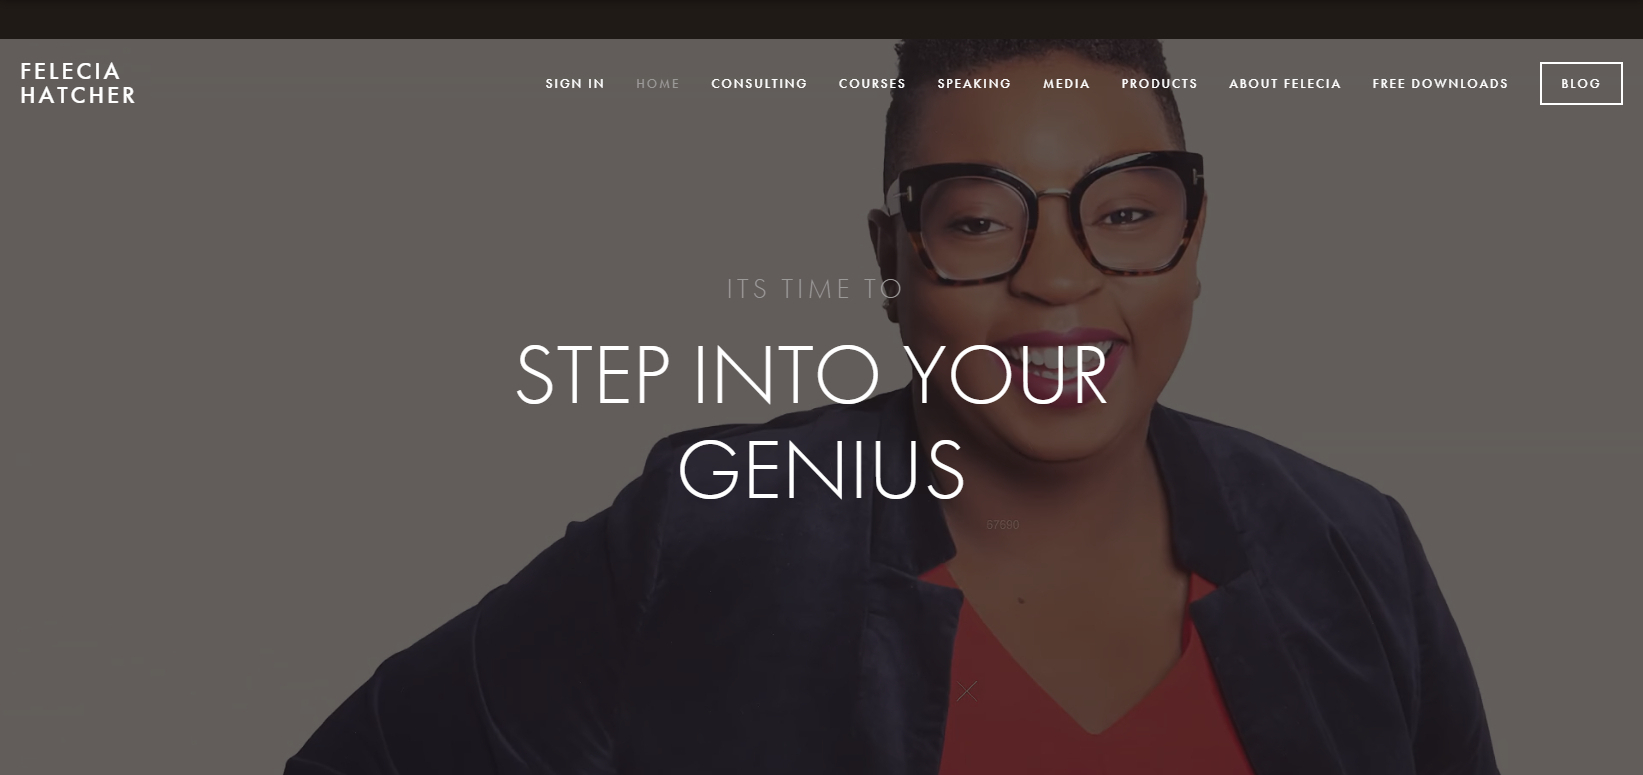 White text saying "Step into your genius" superimposed  over a closeup of a professional woman's head and shoulders.